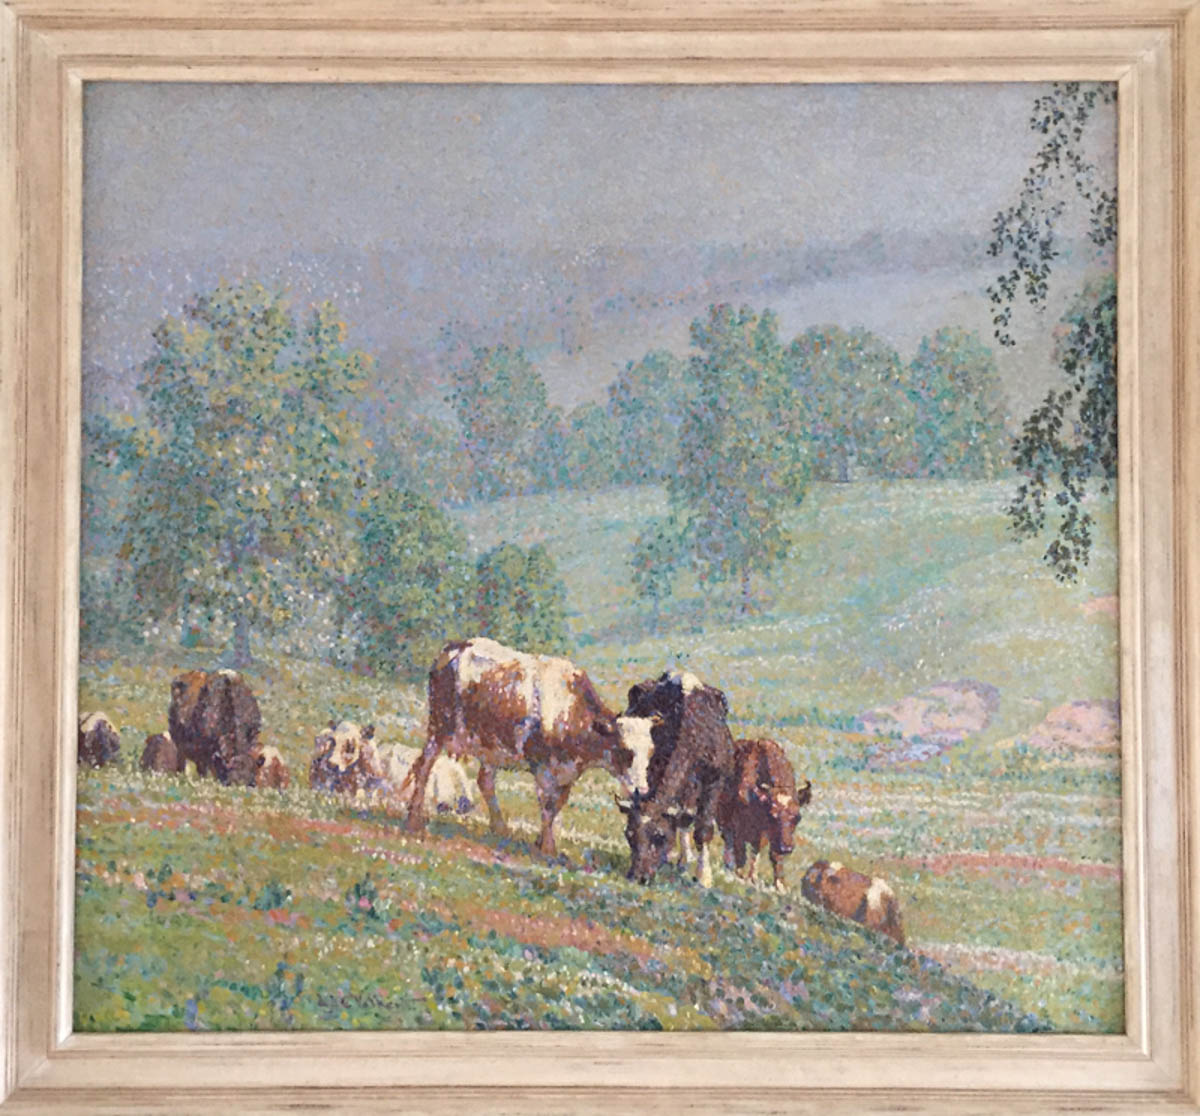 Untitled [Cows grazing on steep slope, dotted brushwork]